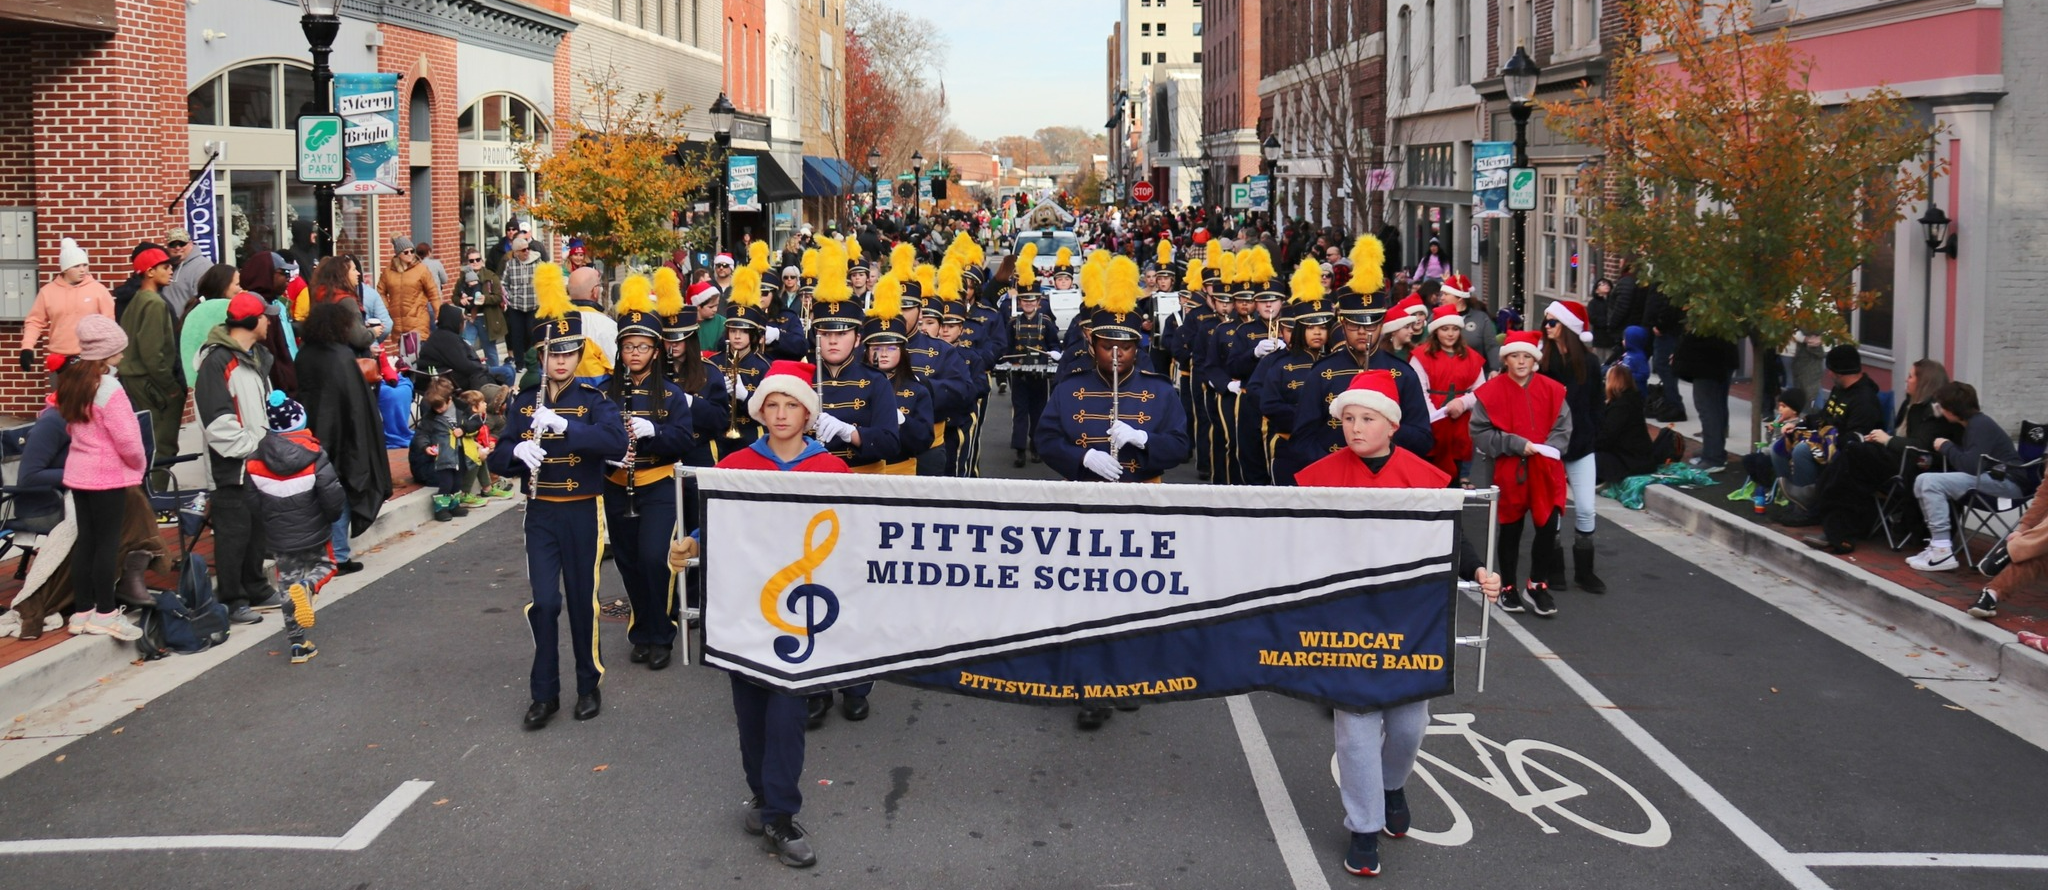 Marching Band in the Christmas parade